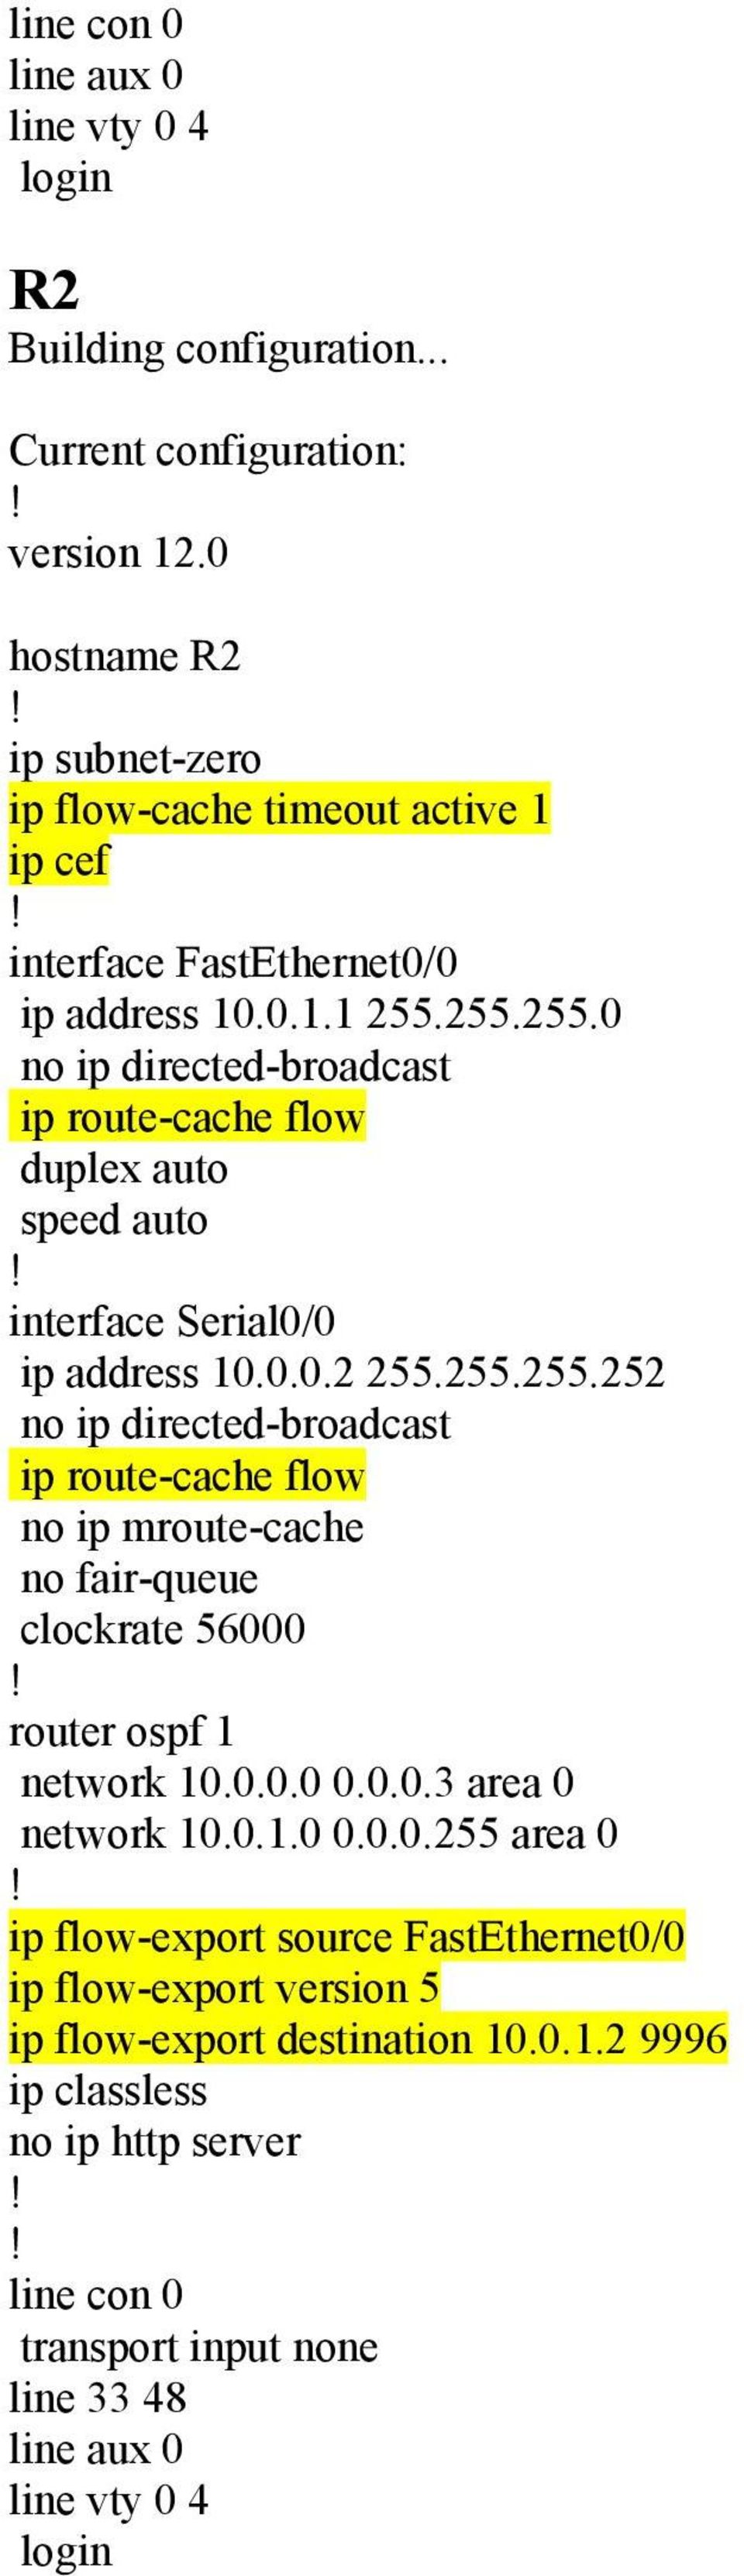 255.255.0 no ip directed-broadcast ip route-cache flow duplex auto speed auto interface Serial0/0 ip address 10.0.0.2 255.255.255.252 no ip directed-broadcast ip route-cache flow no ip mroute-cache no fair-queue clockrate 56000 router ospf 1 network 10.